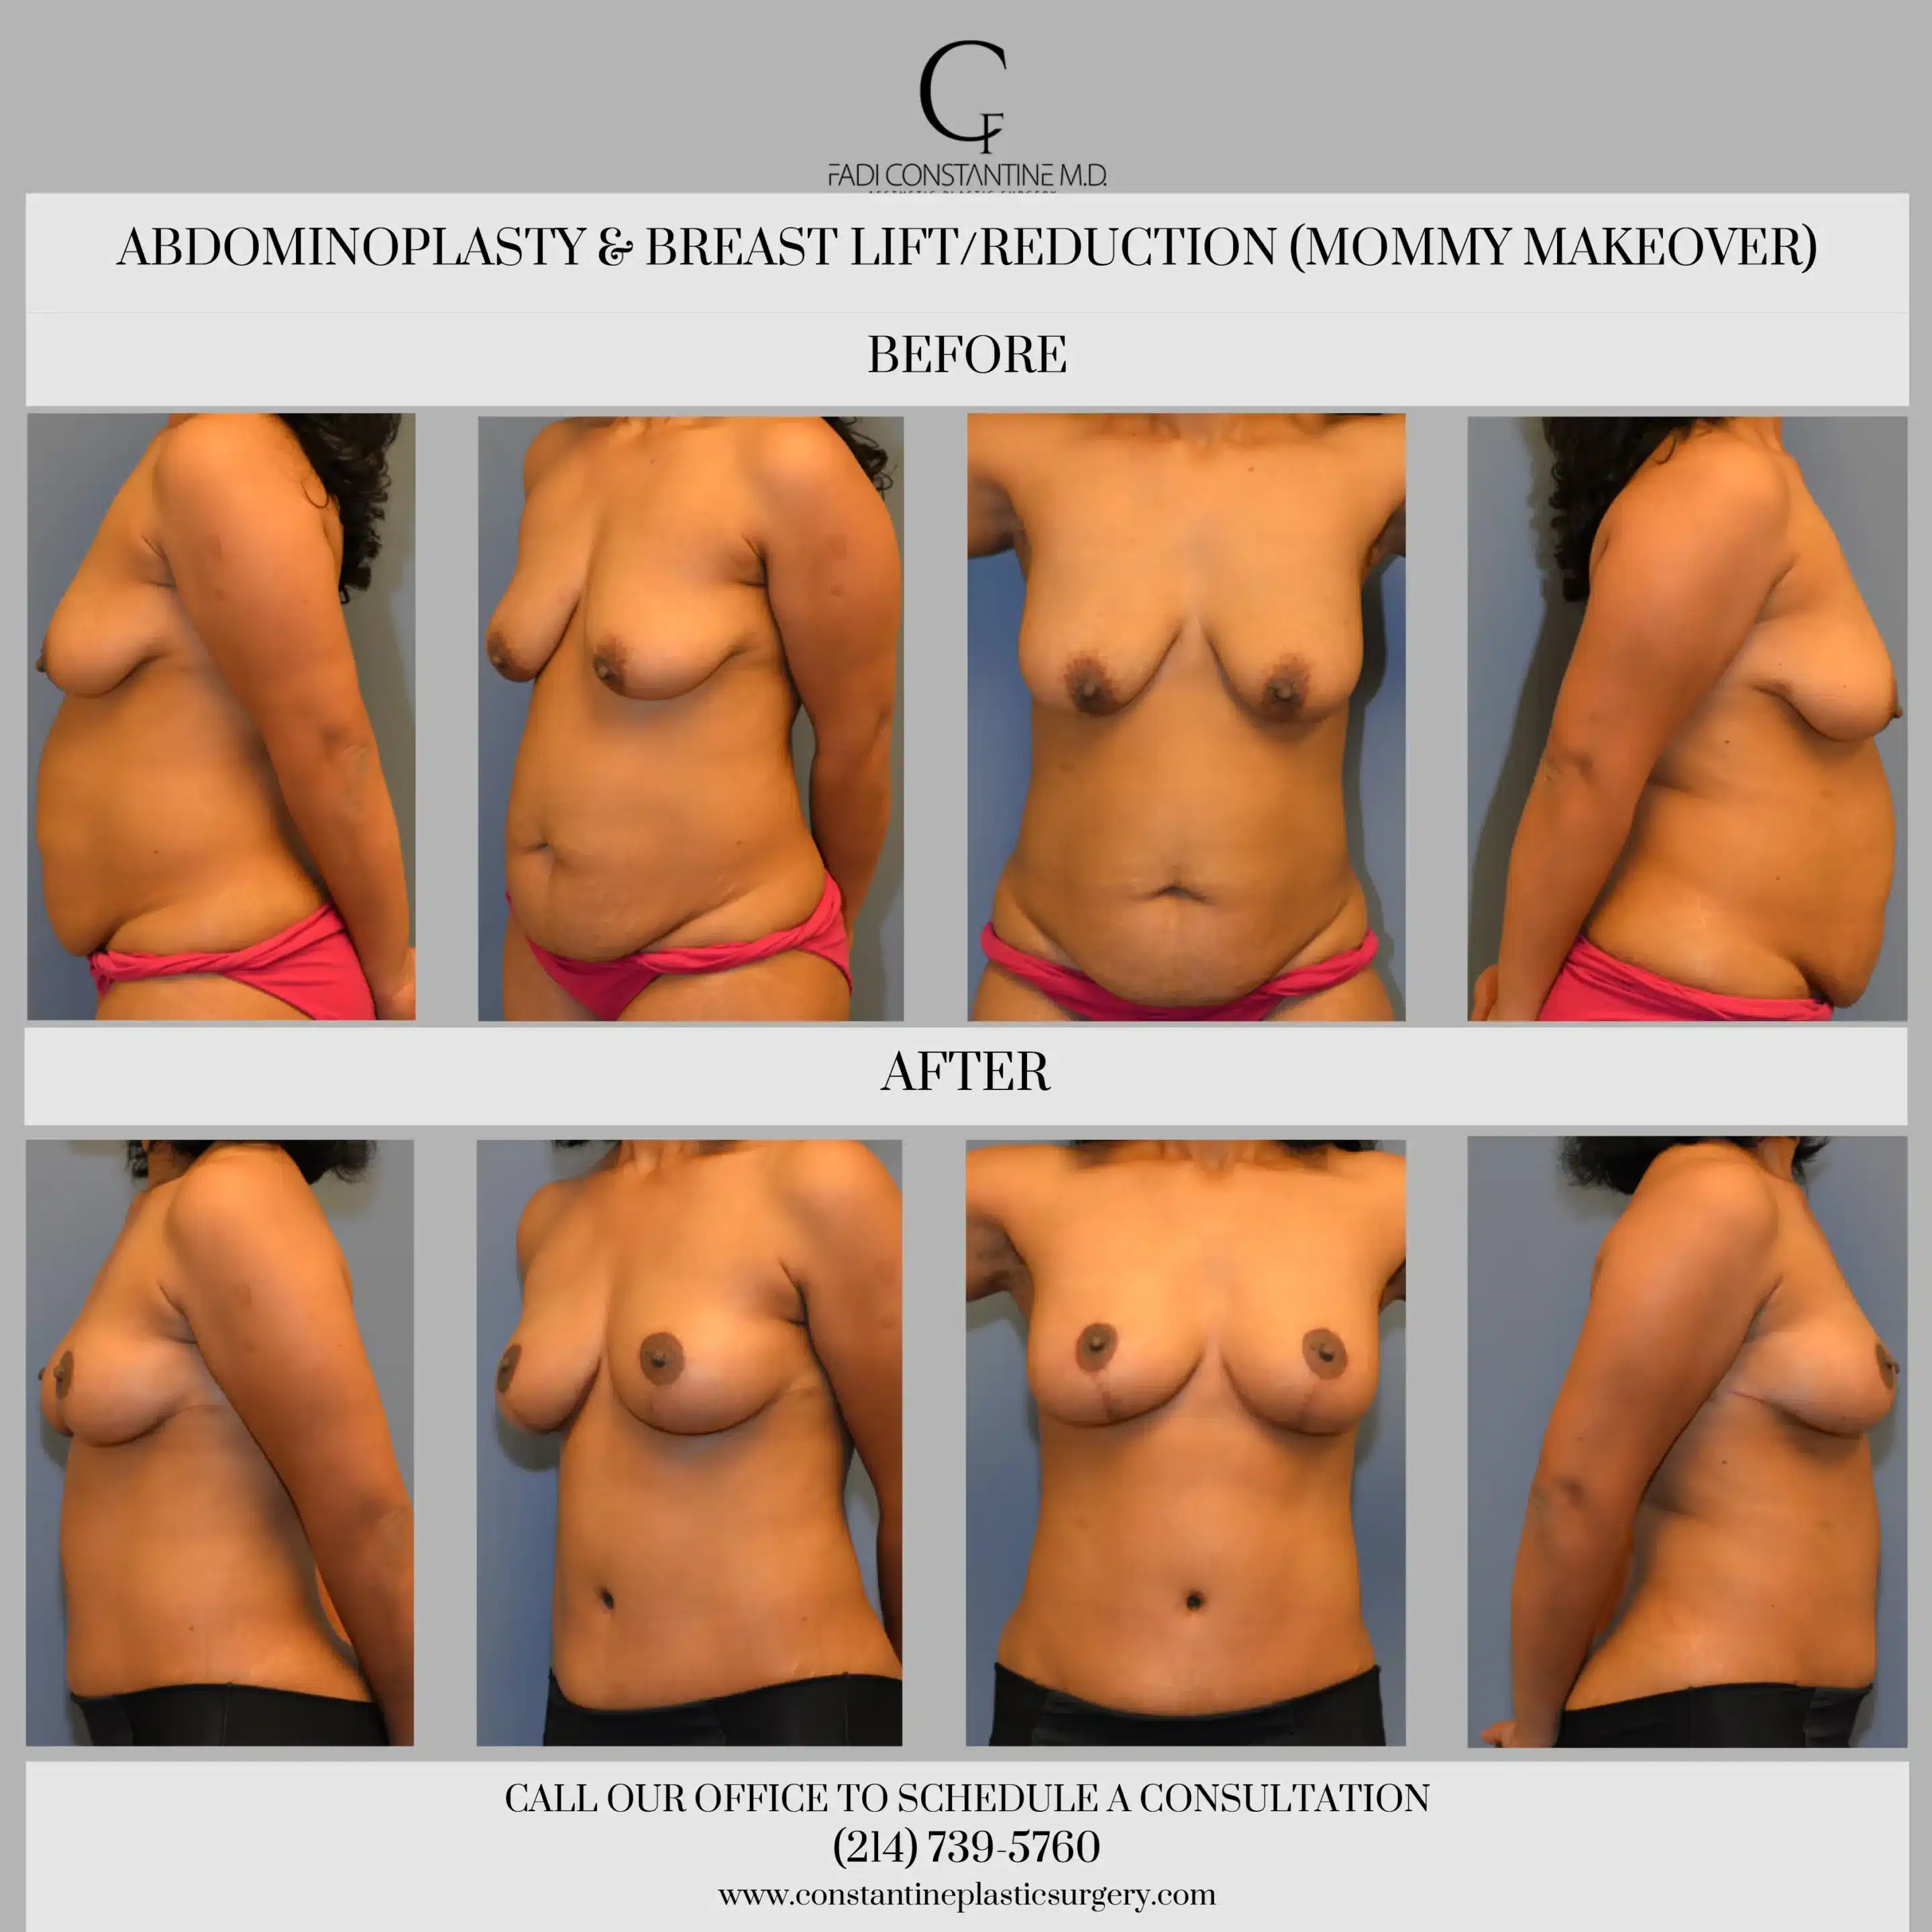 What Does Breast Lift Without Implants Aim To Achieve